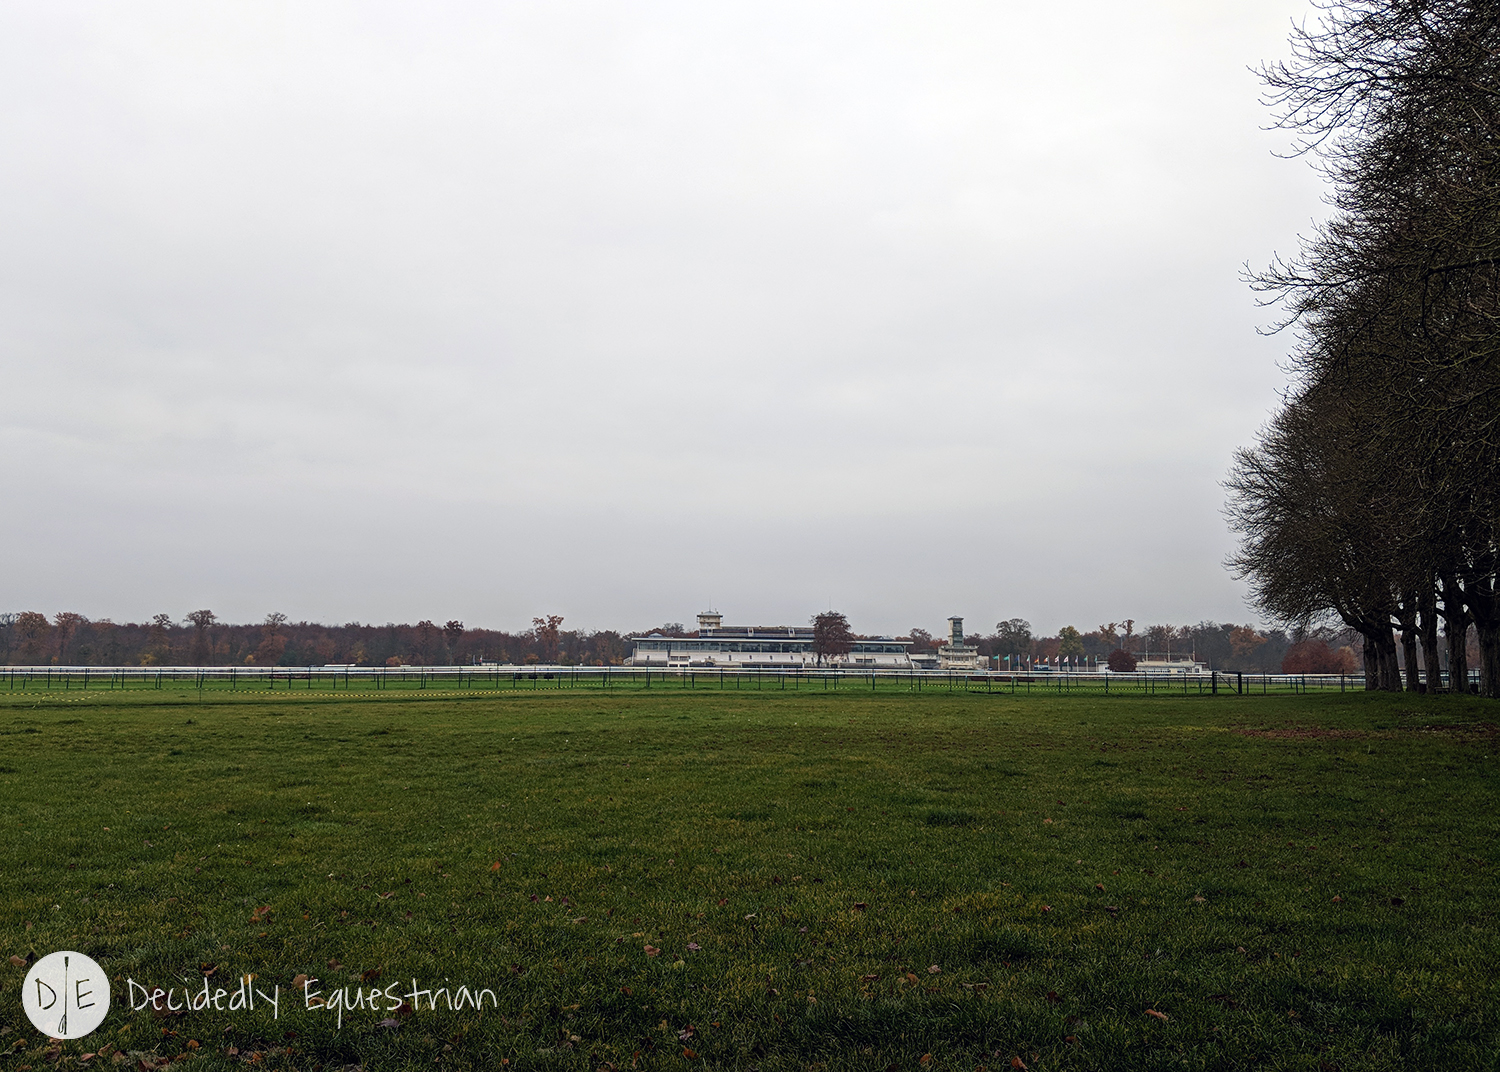 Finding Horses While Traveling - Chantilly France